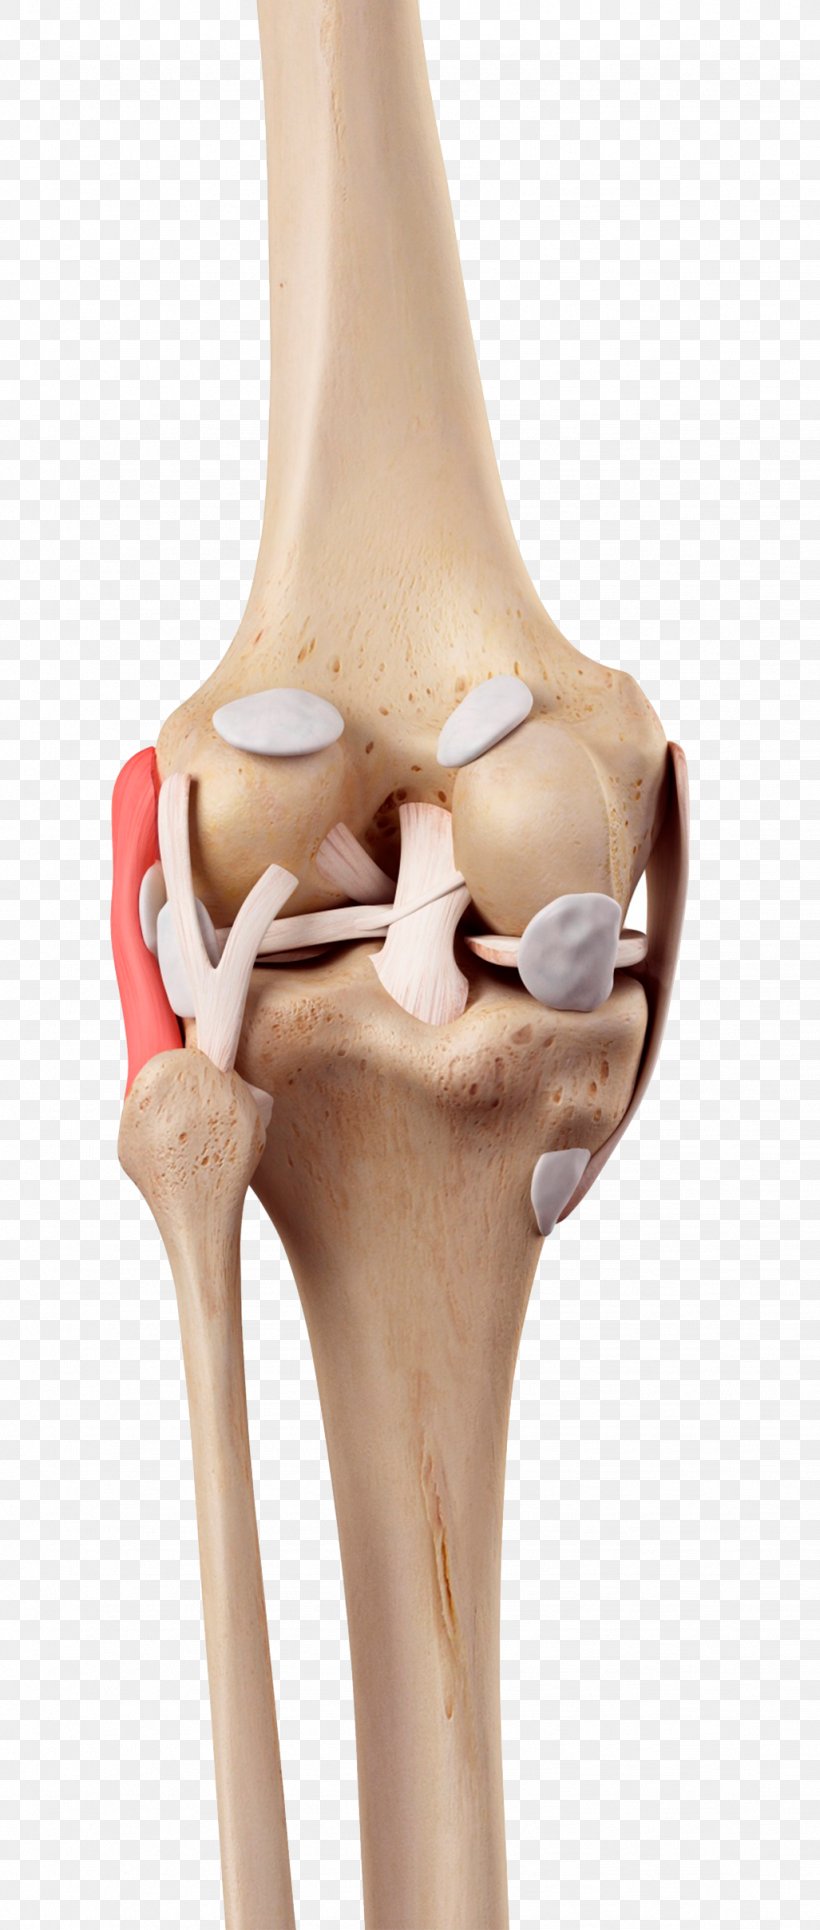 Knee Medial Collateral Ligament Fibular Collateral Ligament Anterior Cruciate Ligament, PNG, 1027x2418px, Knee, Anterior Cruciate Ligament, Bone, Coronal Plane, Cruciate Ligament Download Free